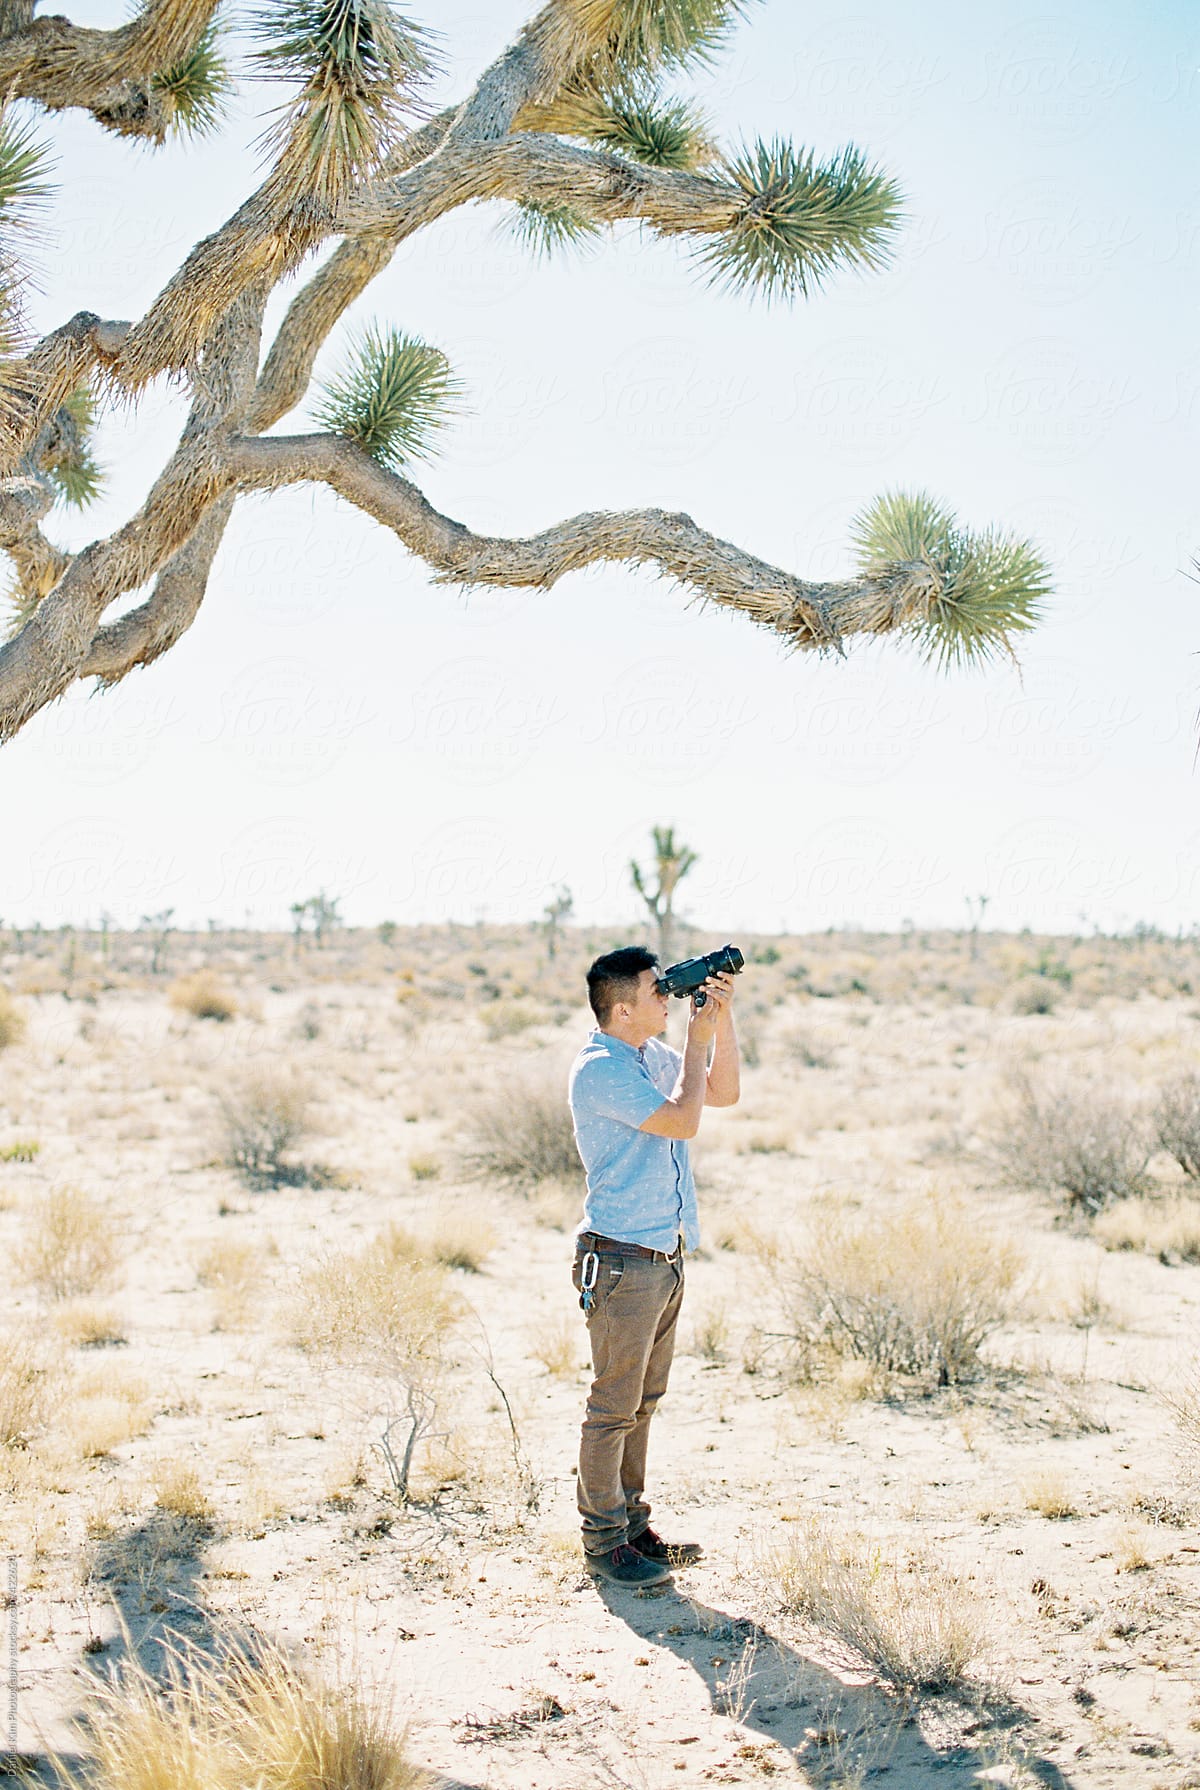 Young man taking picture in desert